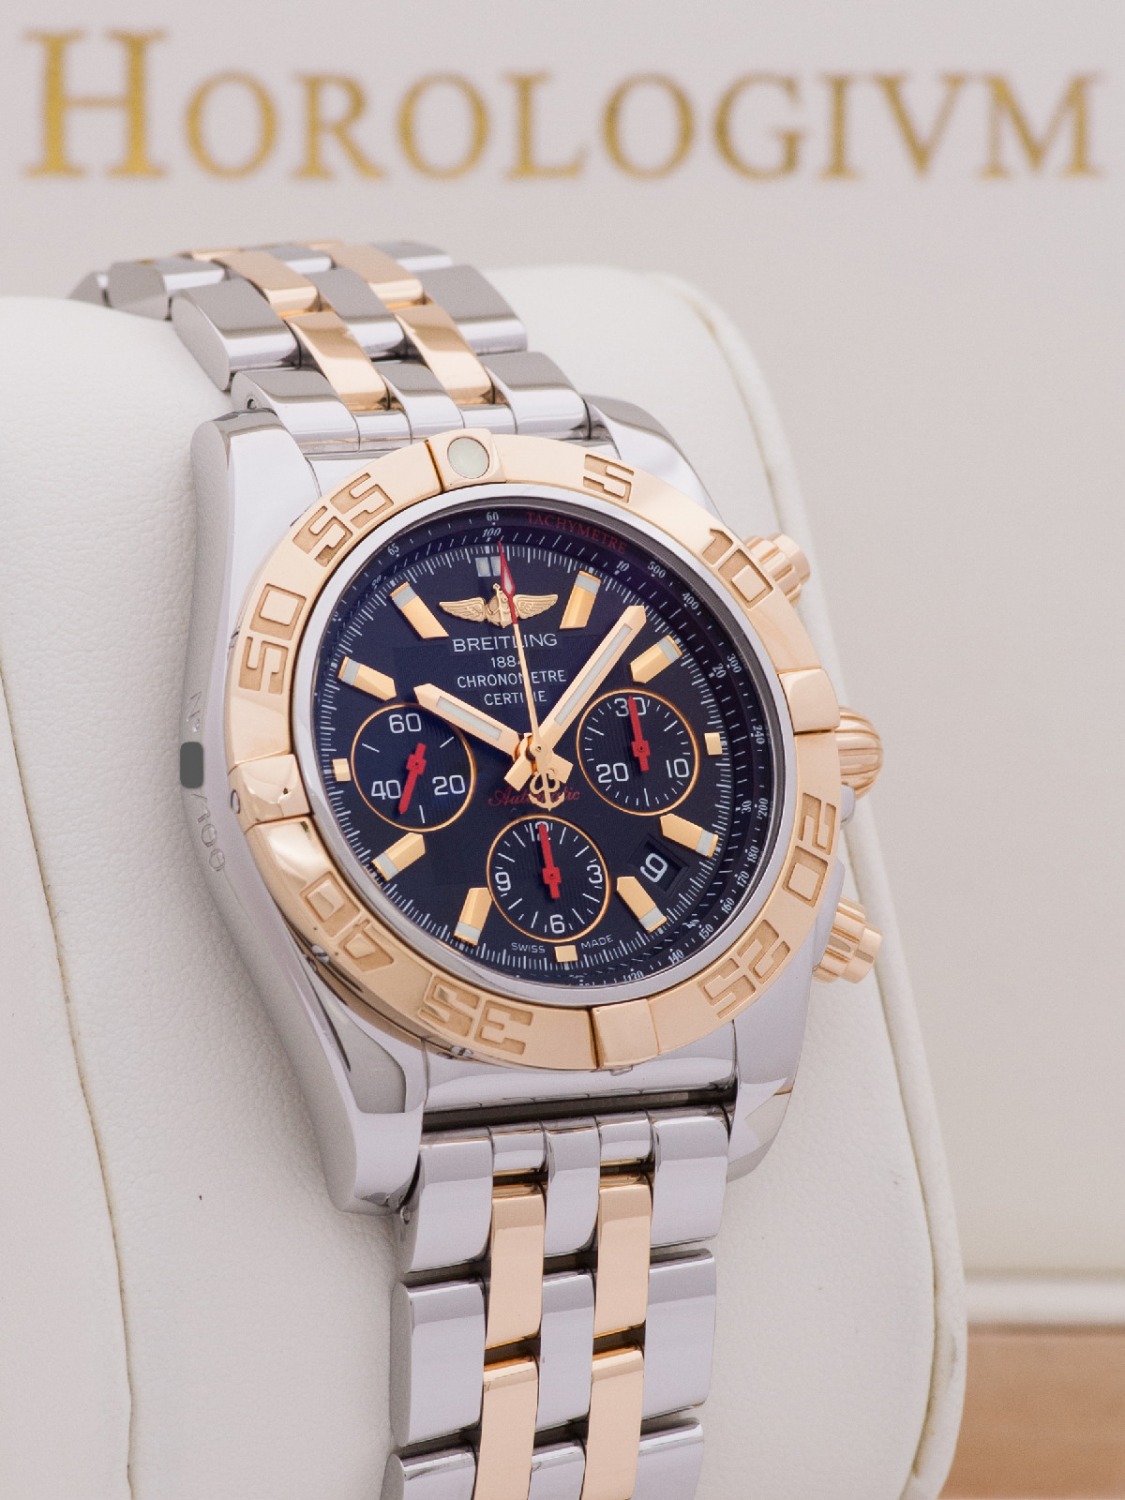 Breitling Chronomat CB0111 Limited 100 PCS watch, Two Tone (Bi - colored) silver and yellow Gold